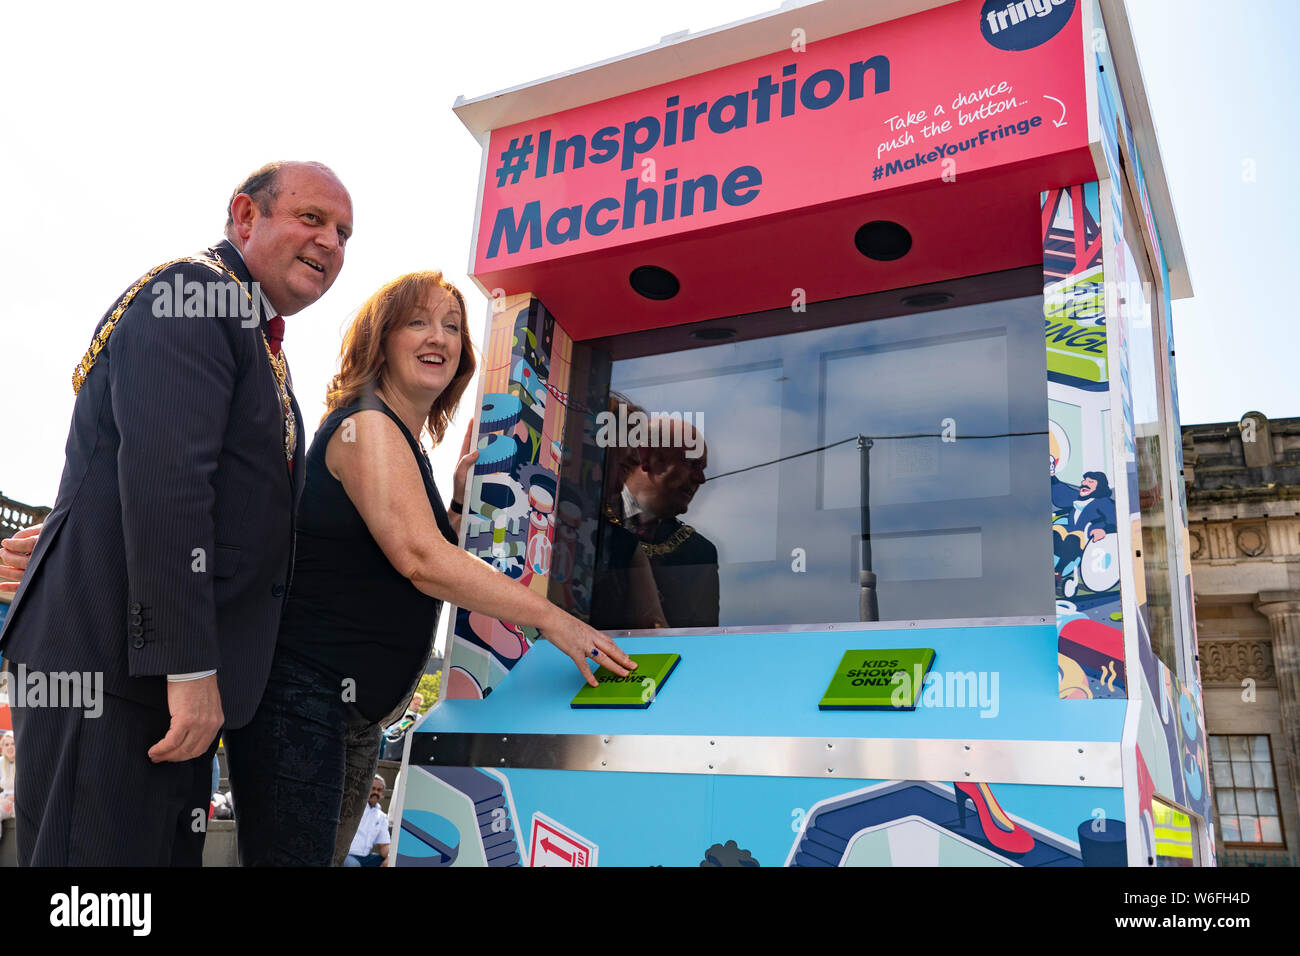 Edinburgh, Scotland, UK. 31 July 2019. Frank Ross, Lord Provost of Edinburgh  and Shona McCarthy, Chief Executive of of the Edinburgh Festival Fringe Society proclaimed the start of the 2019 Fringe by pushing the button on the new colourful arcade style Fringe Inspiration Machine on The Mound in Edinburgh today. The new Inspiration Machine is designed to help out audiences who might be having trouble deciding which shows to see from the diverse programme, by delivering three randomised suggestions of Fringe shows at the push of a button. Stock Photo